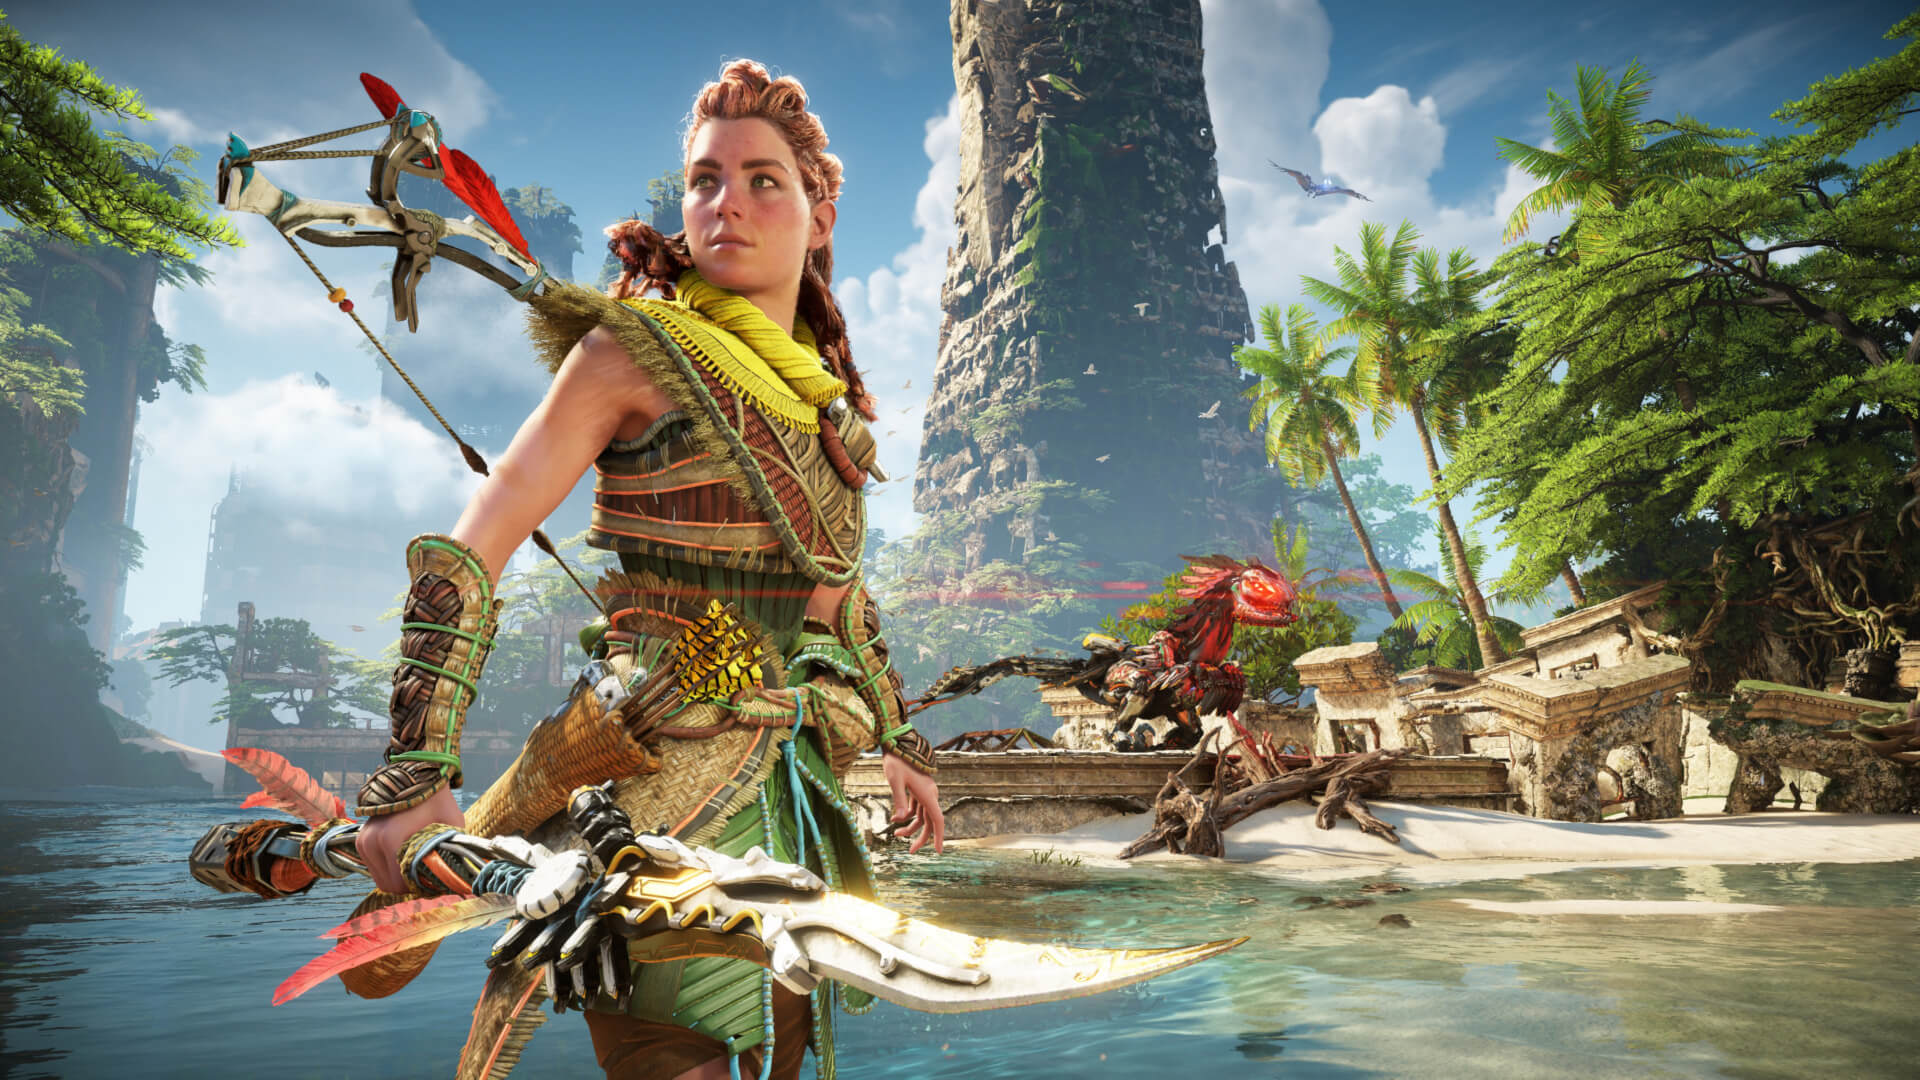 Aloy standing in water in Horizon Forbidden West while a robot creature's eyes glow red in the background